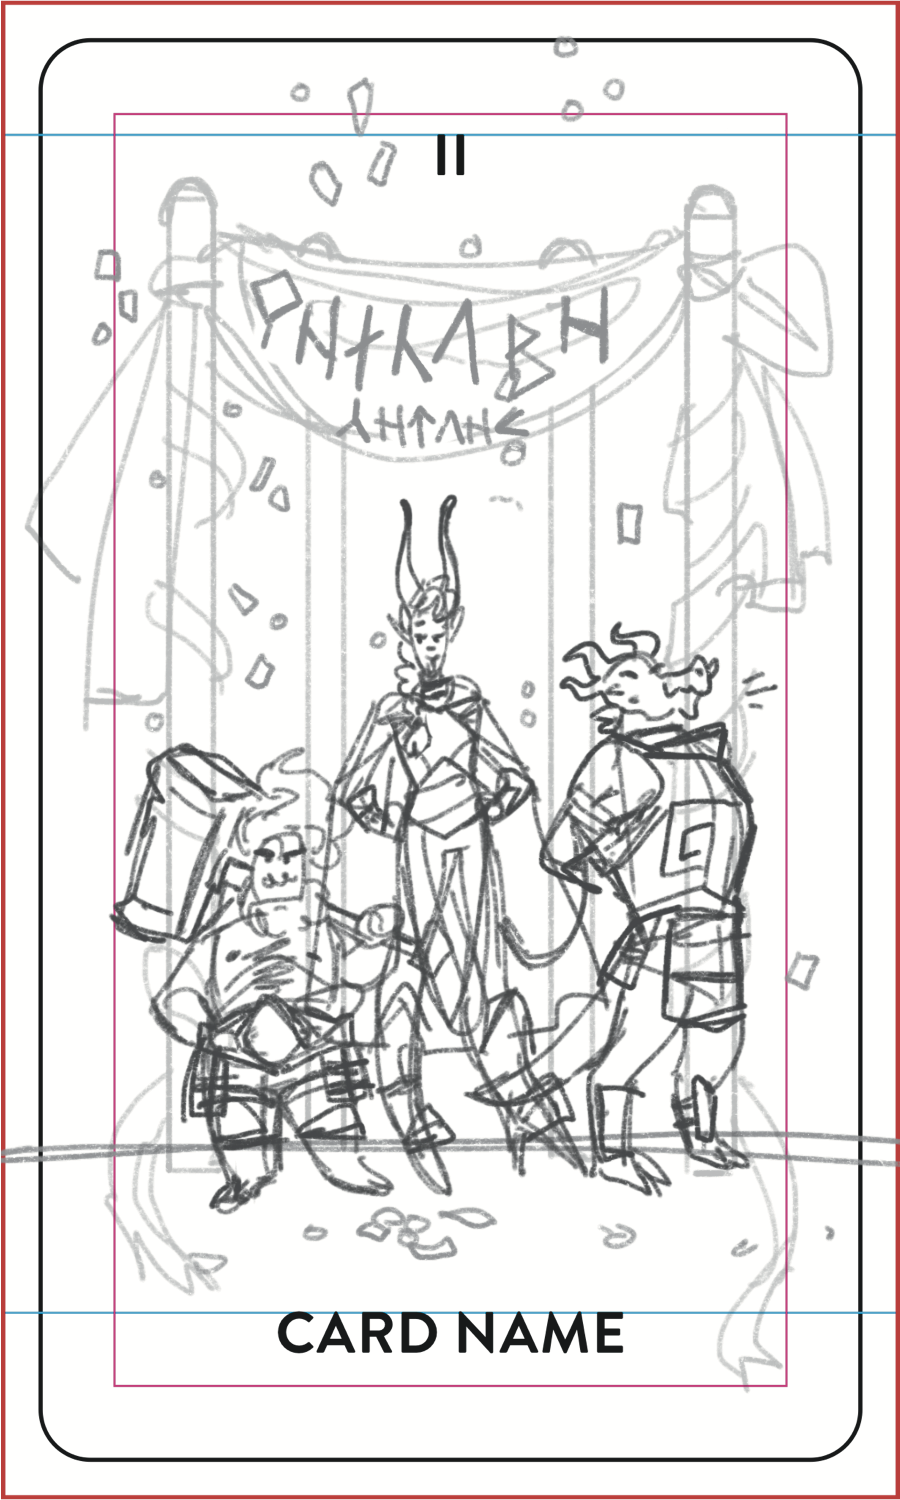 4 Four of Wands.PNG